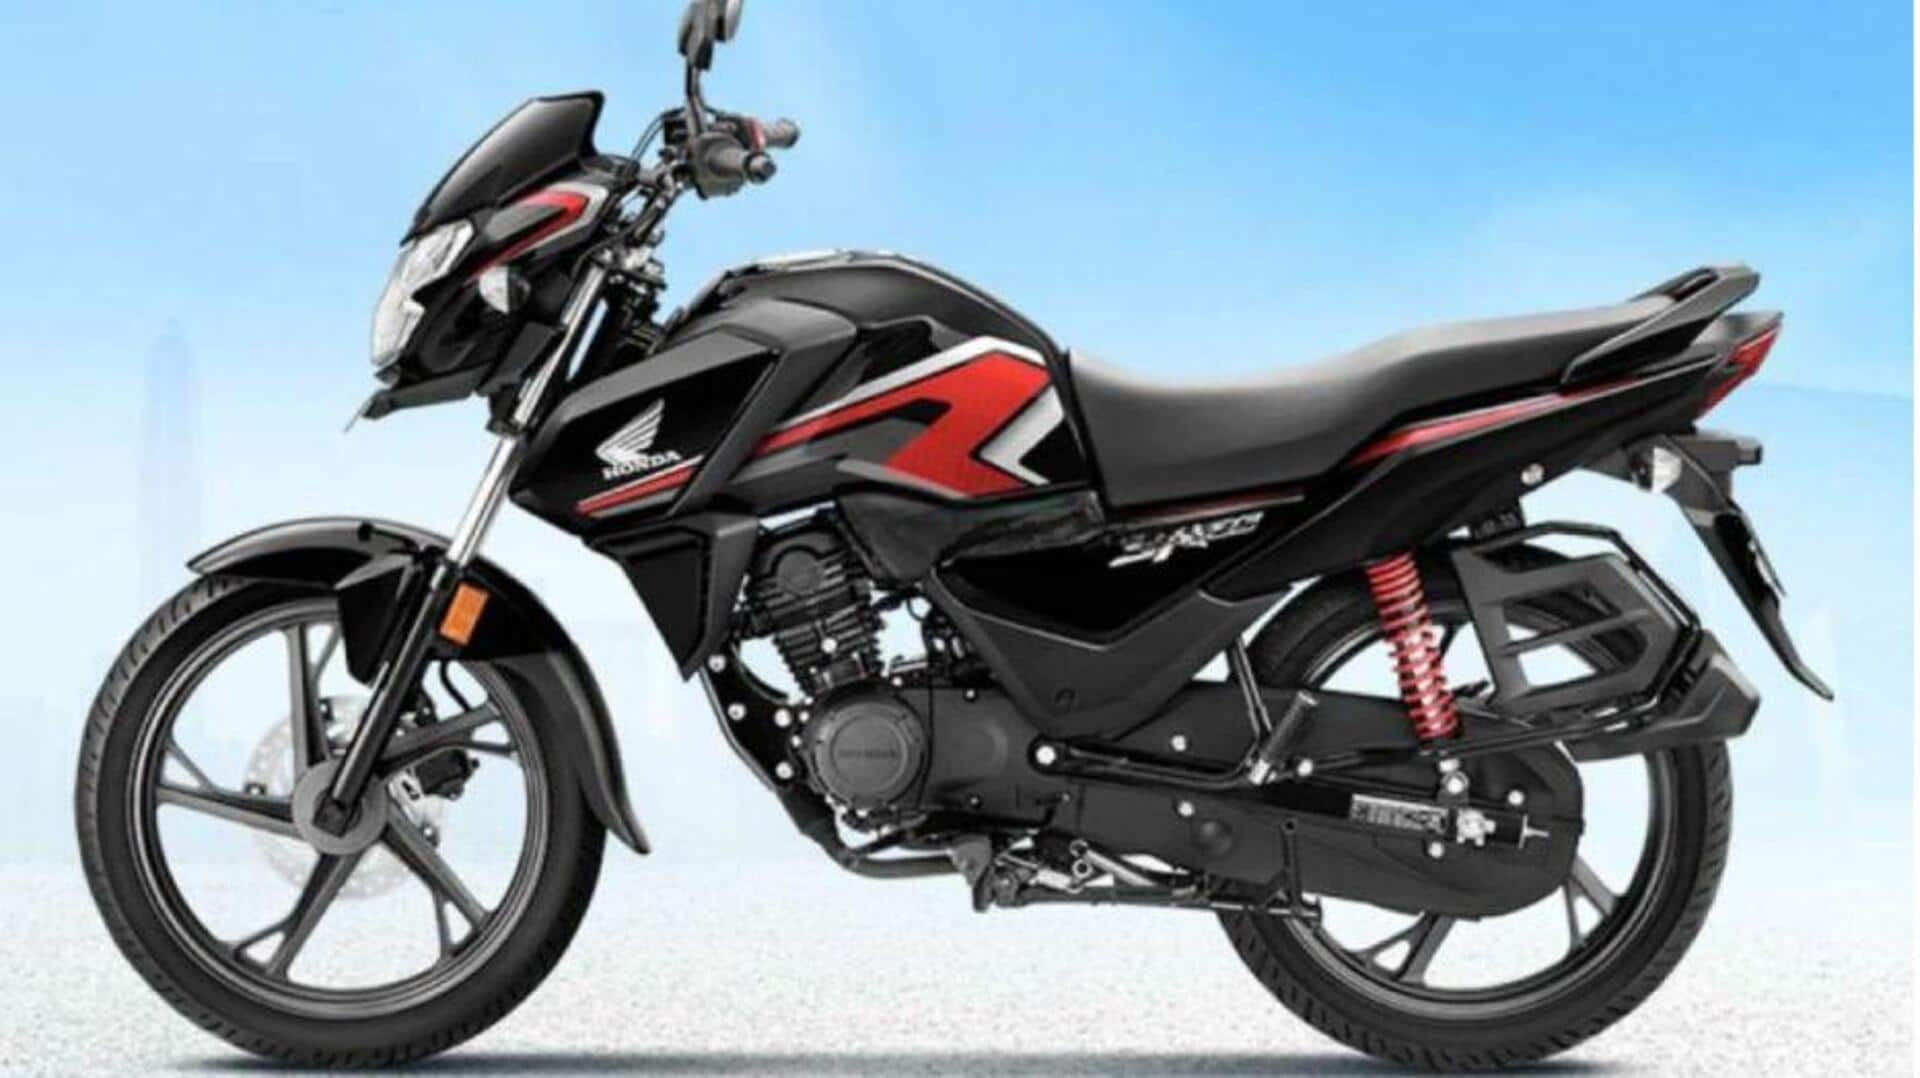 Honda SP160 goes official in India: Check price, features